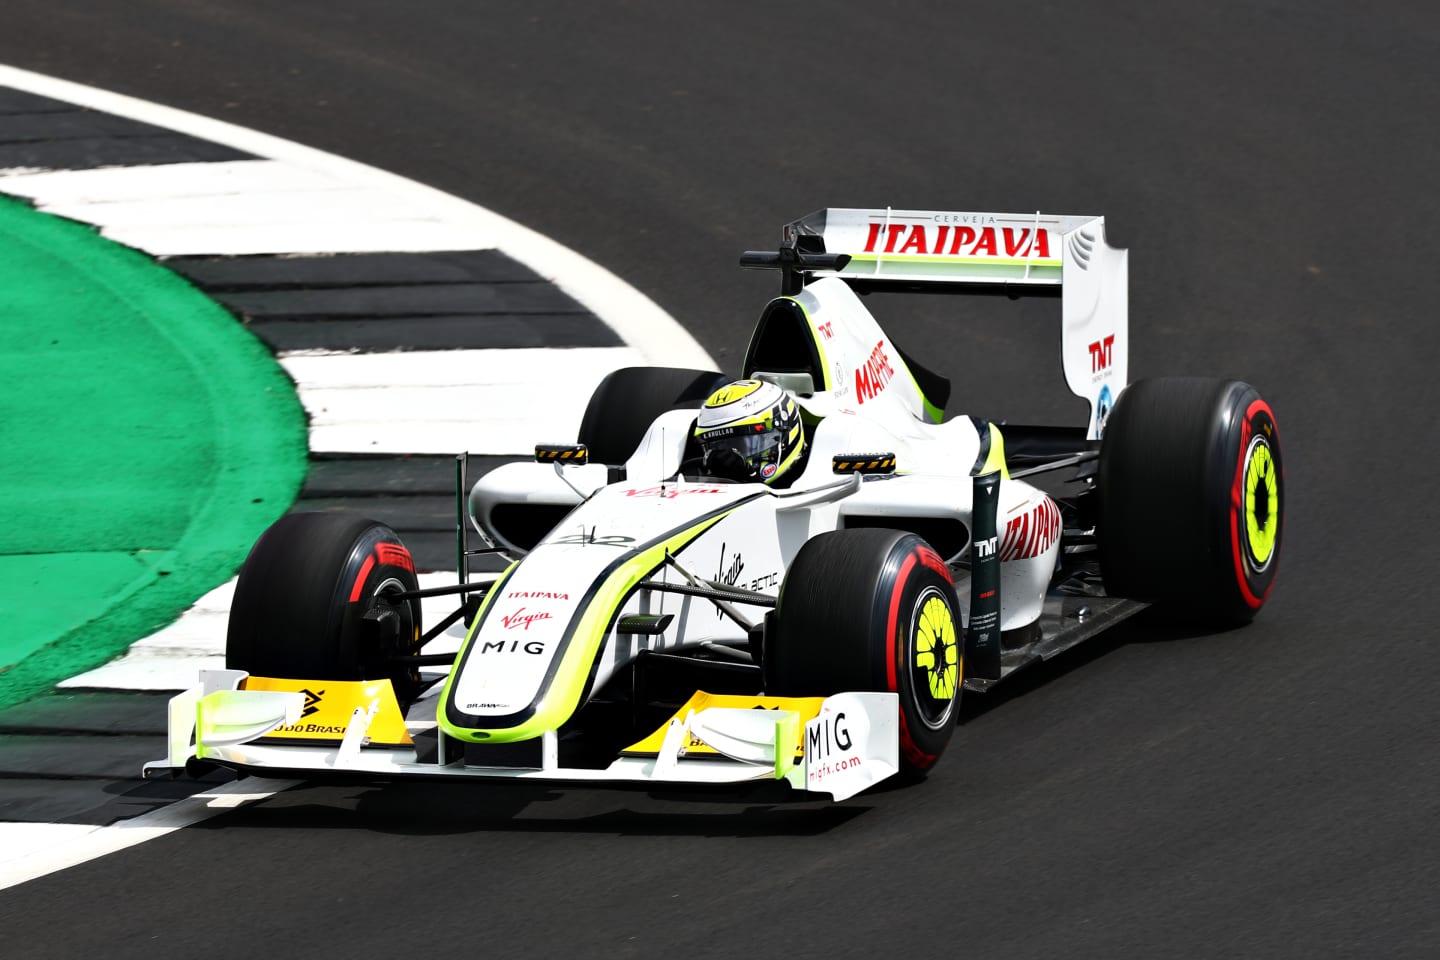 NORTHAMPTON, ENGLAND - JULY 11: Jenson Button of Great Britain drives his Brawn BGP 001 on track